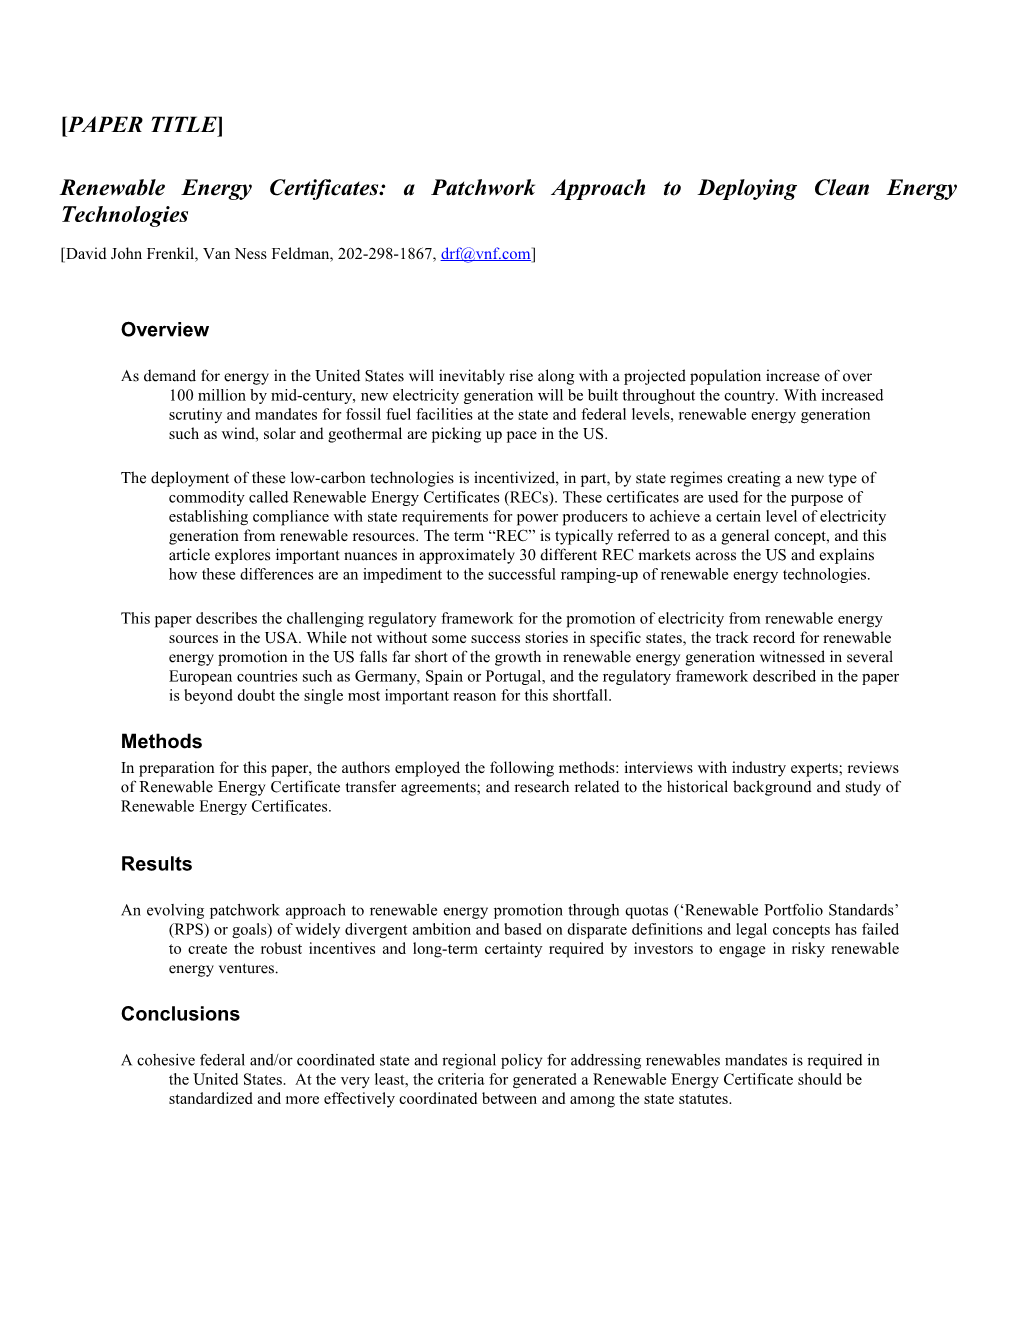 Renewable Energy Certificates: a Patchwork Approach to Deploying Clean Energy Technologies